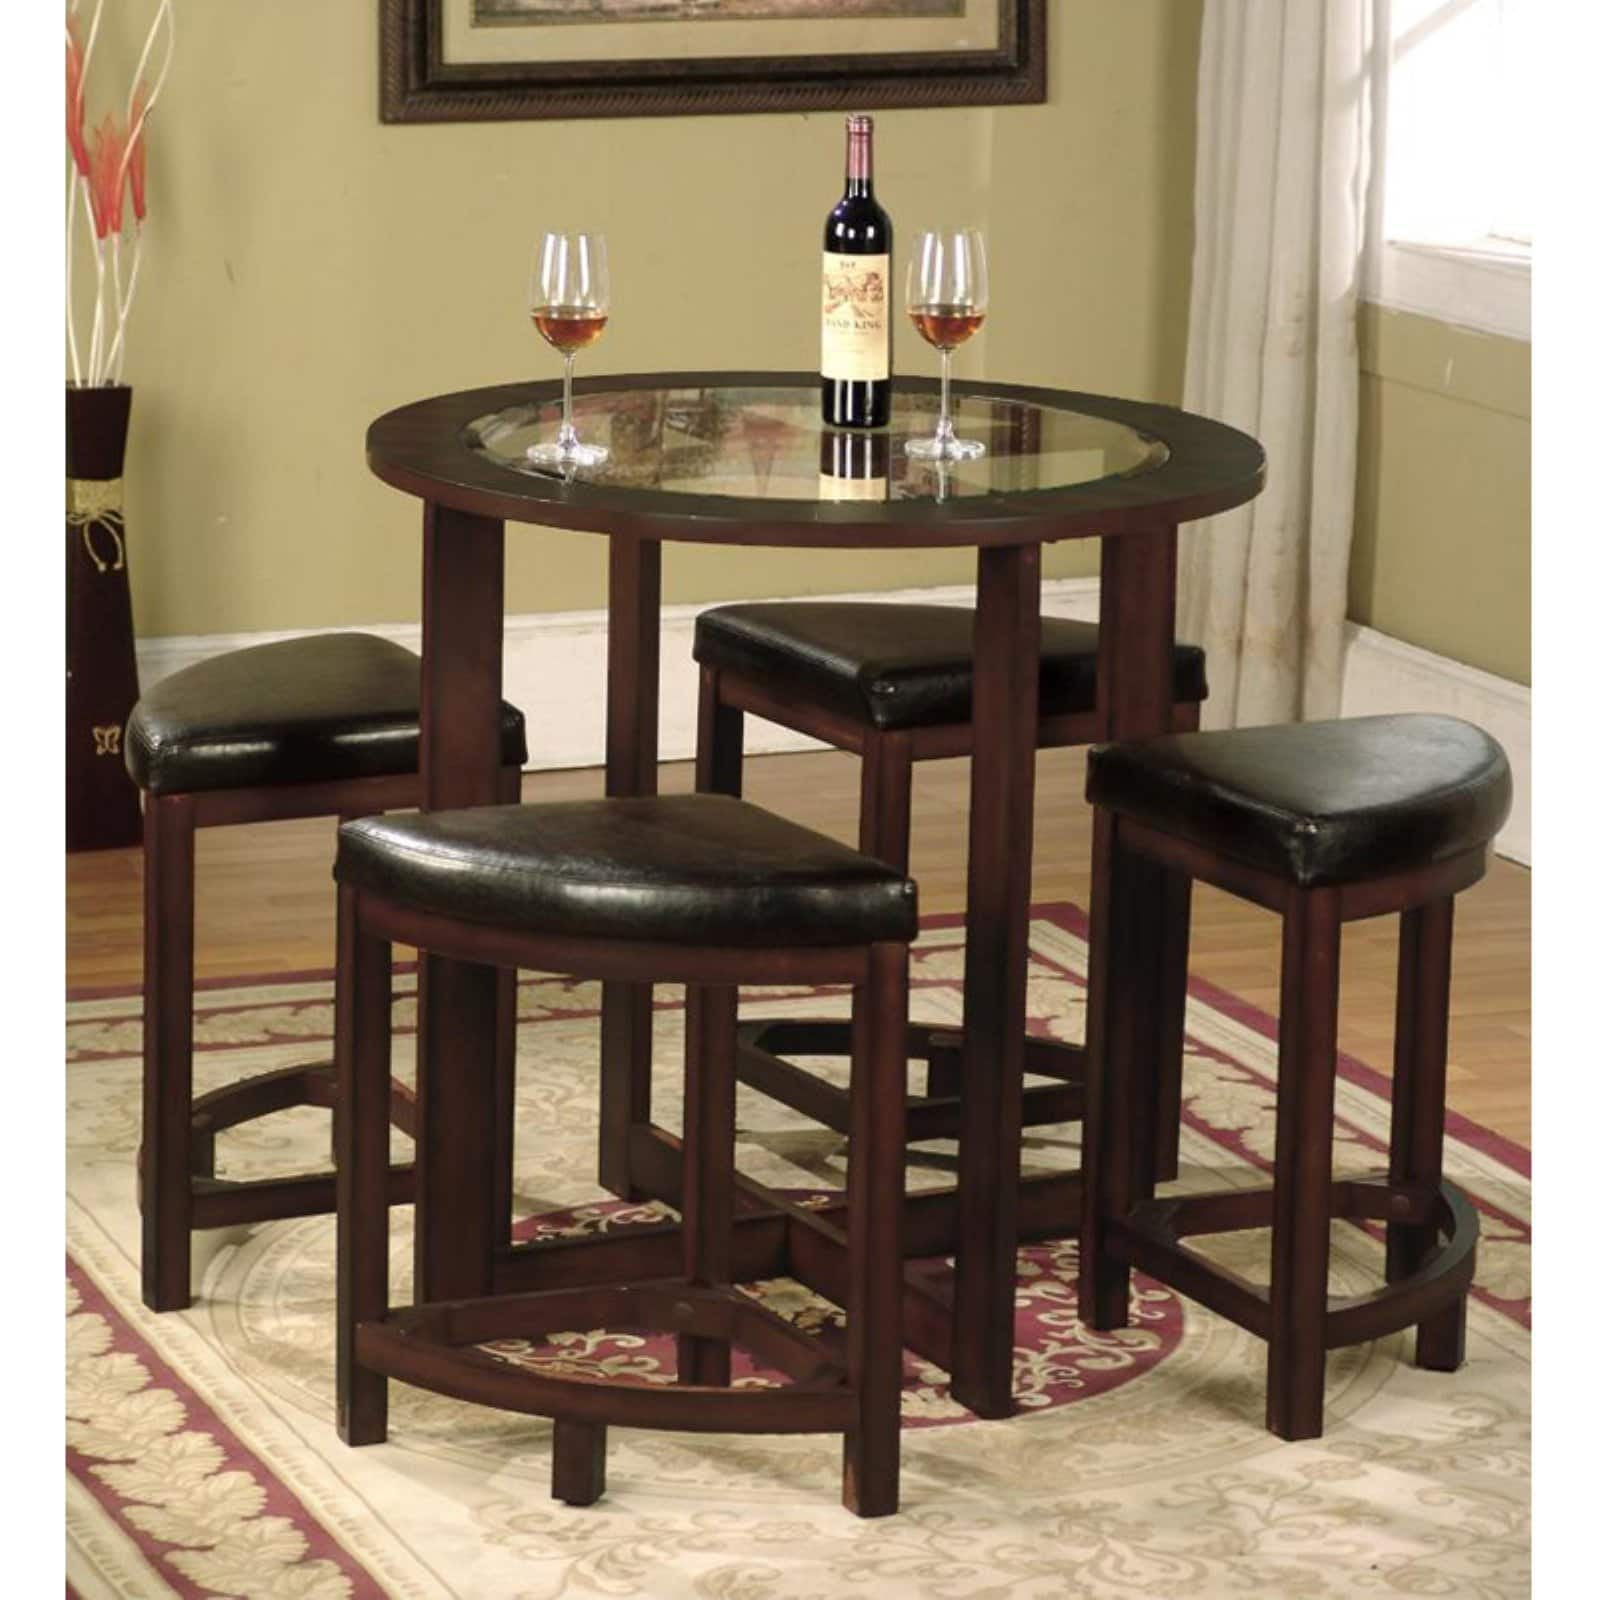 Roundhill Furniture Cylina Solid Wood, Solid Wood Round Dining Table With 4 Chairs